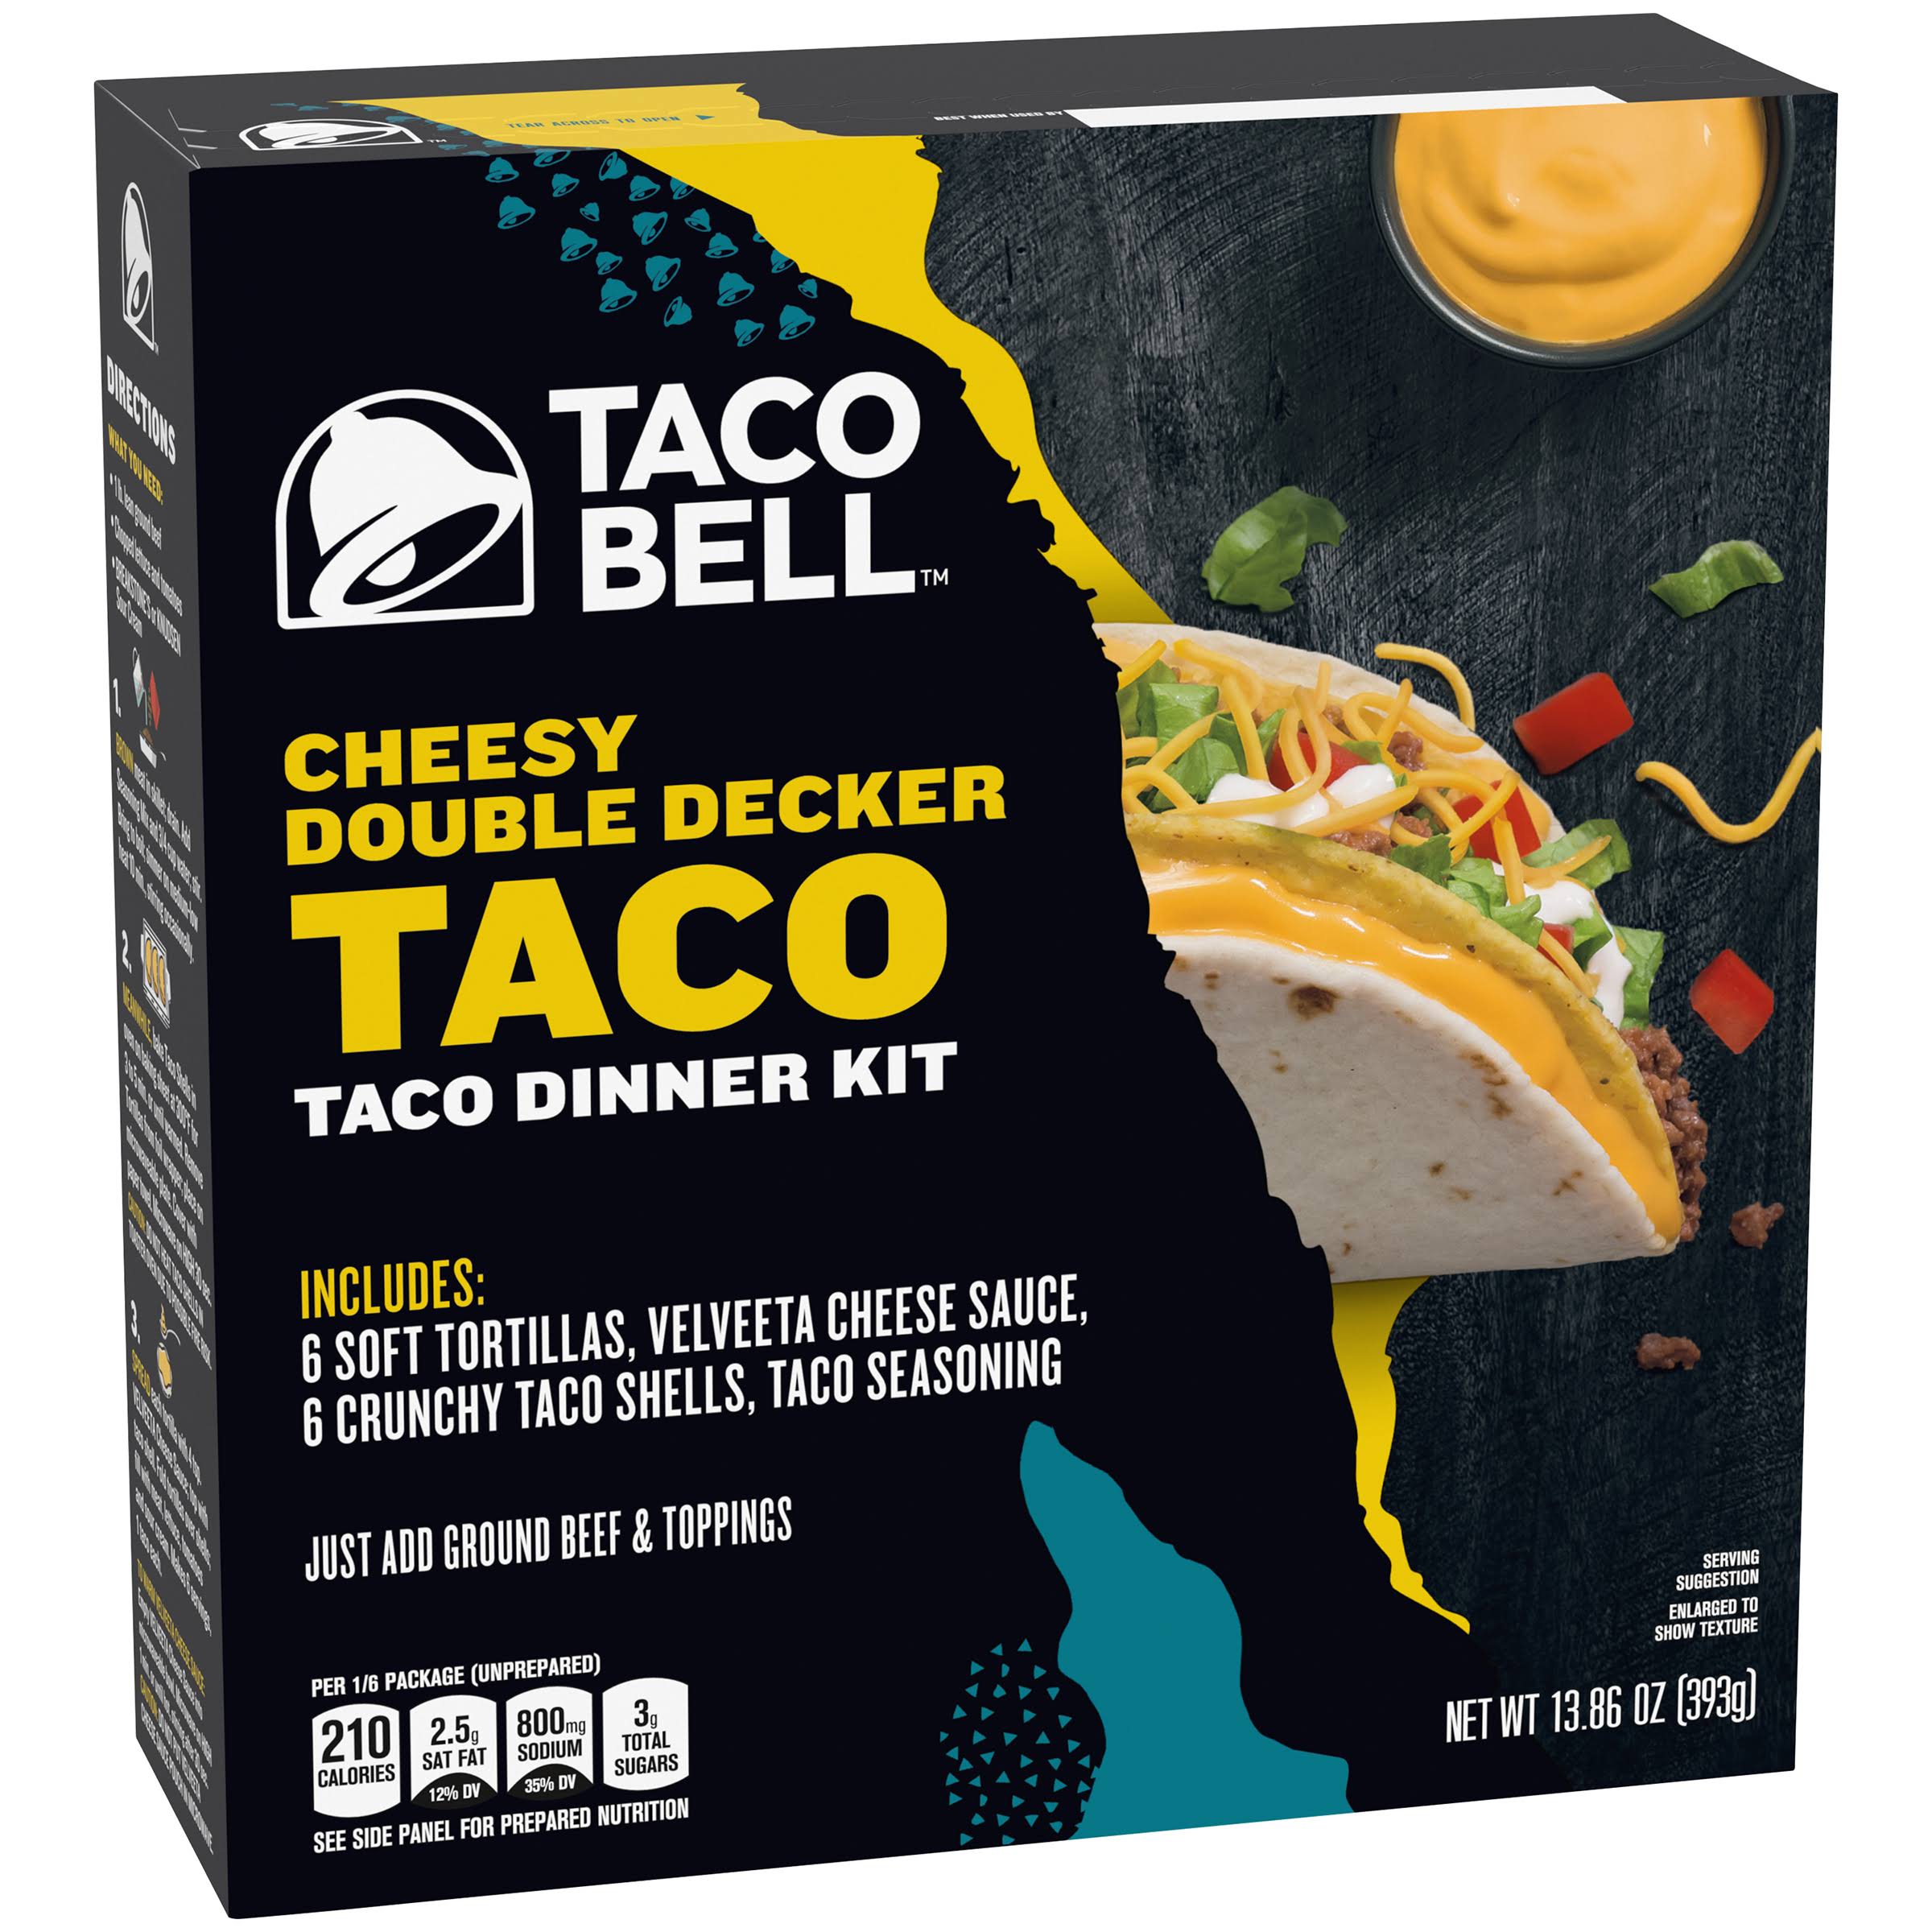 Taco Bell Cheesy Double Decker Taco Dinner Kit - 6 Servings, 13.86oz